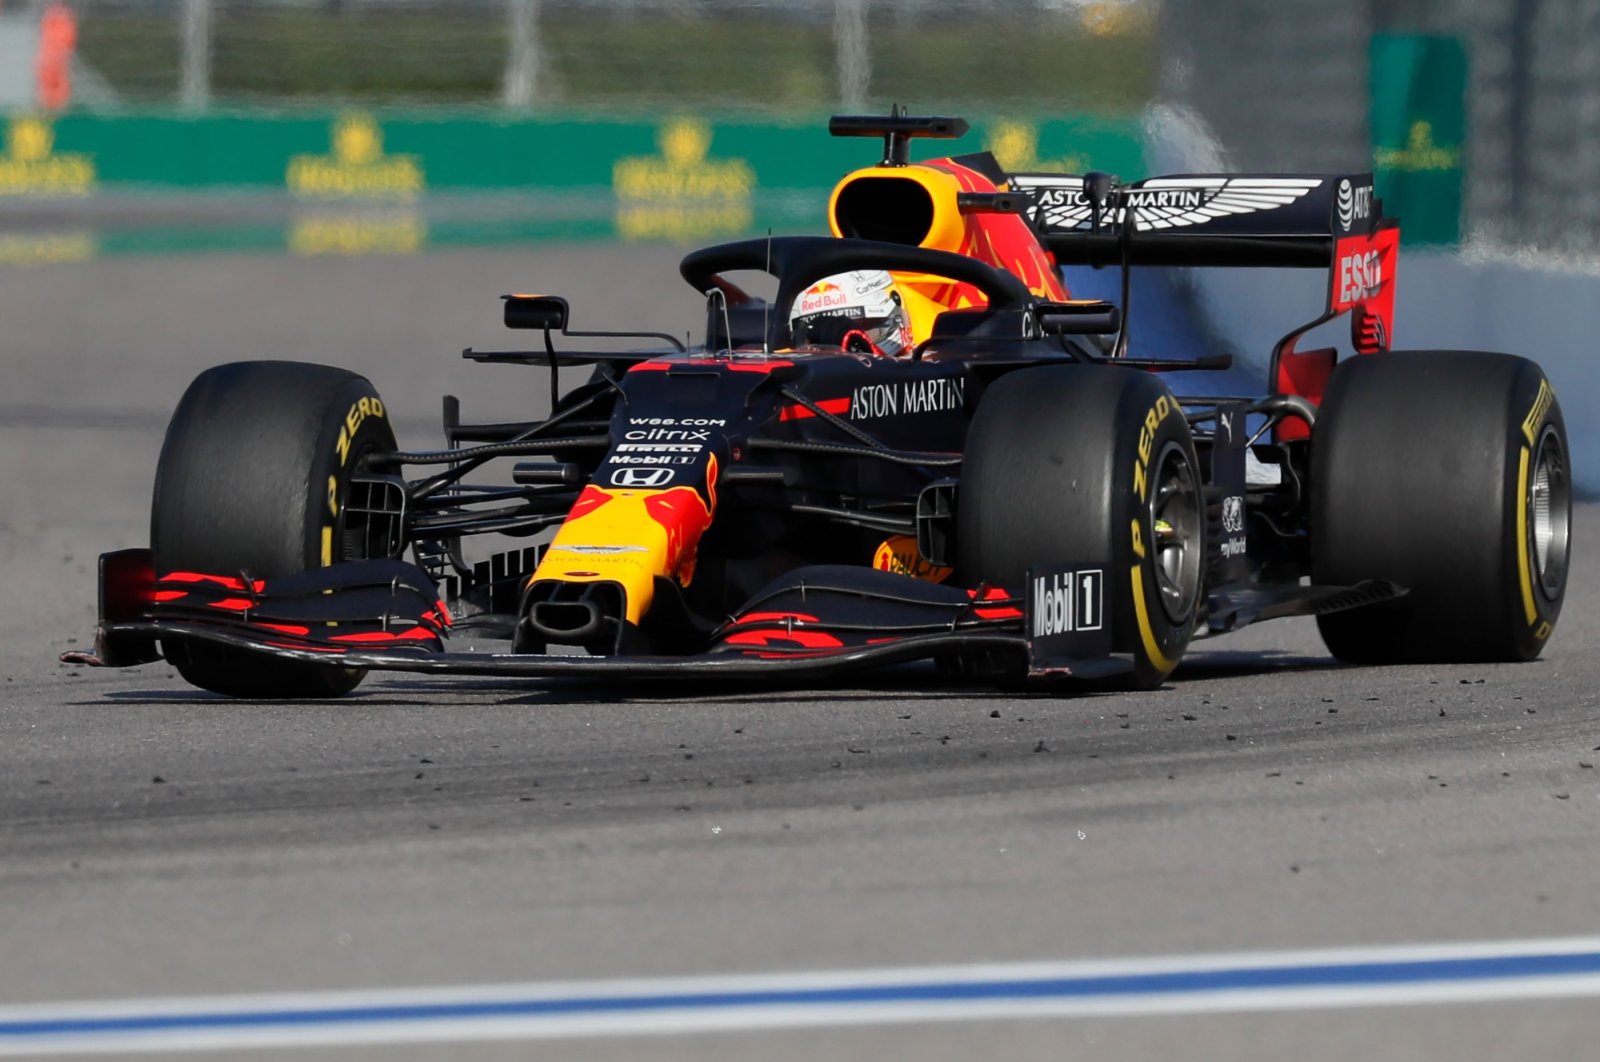 Red Bull driver Max Verstappen in action during the Russian GP, in Sochi, Russia, Sept. 27, 2020. (AFP Photo)